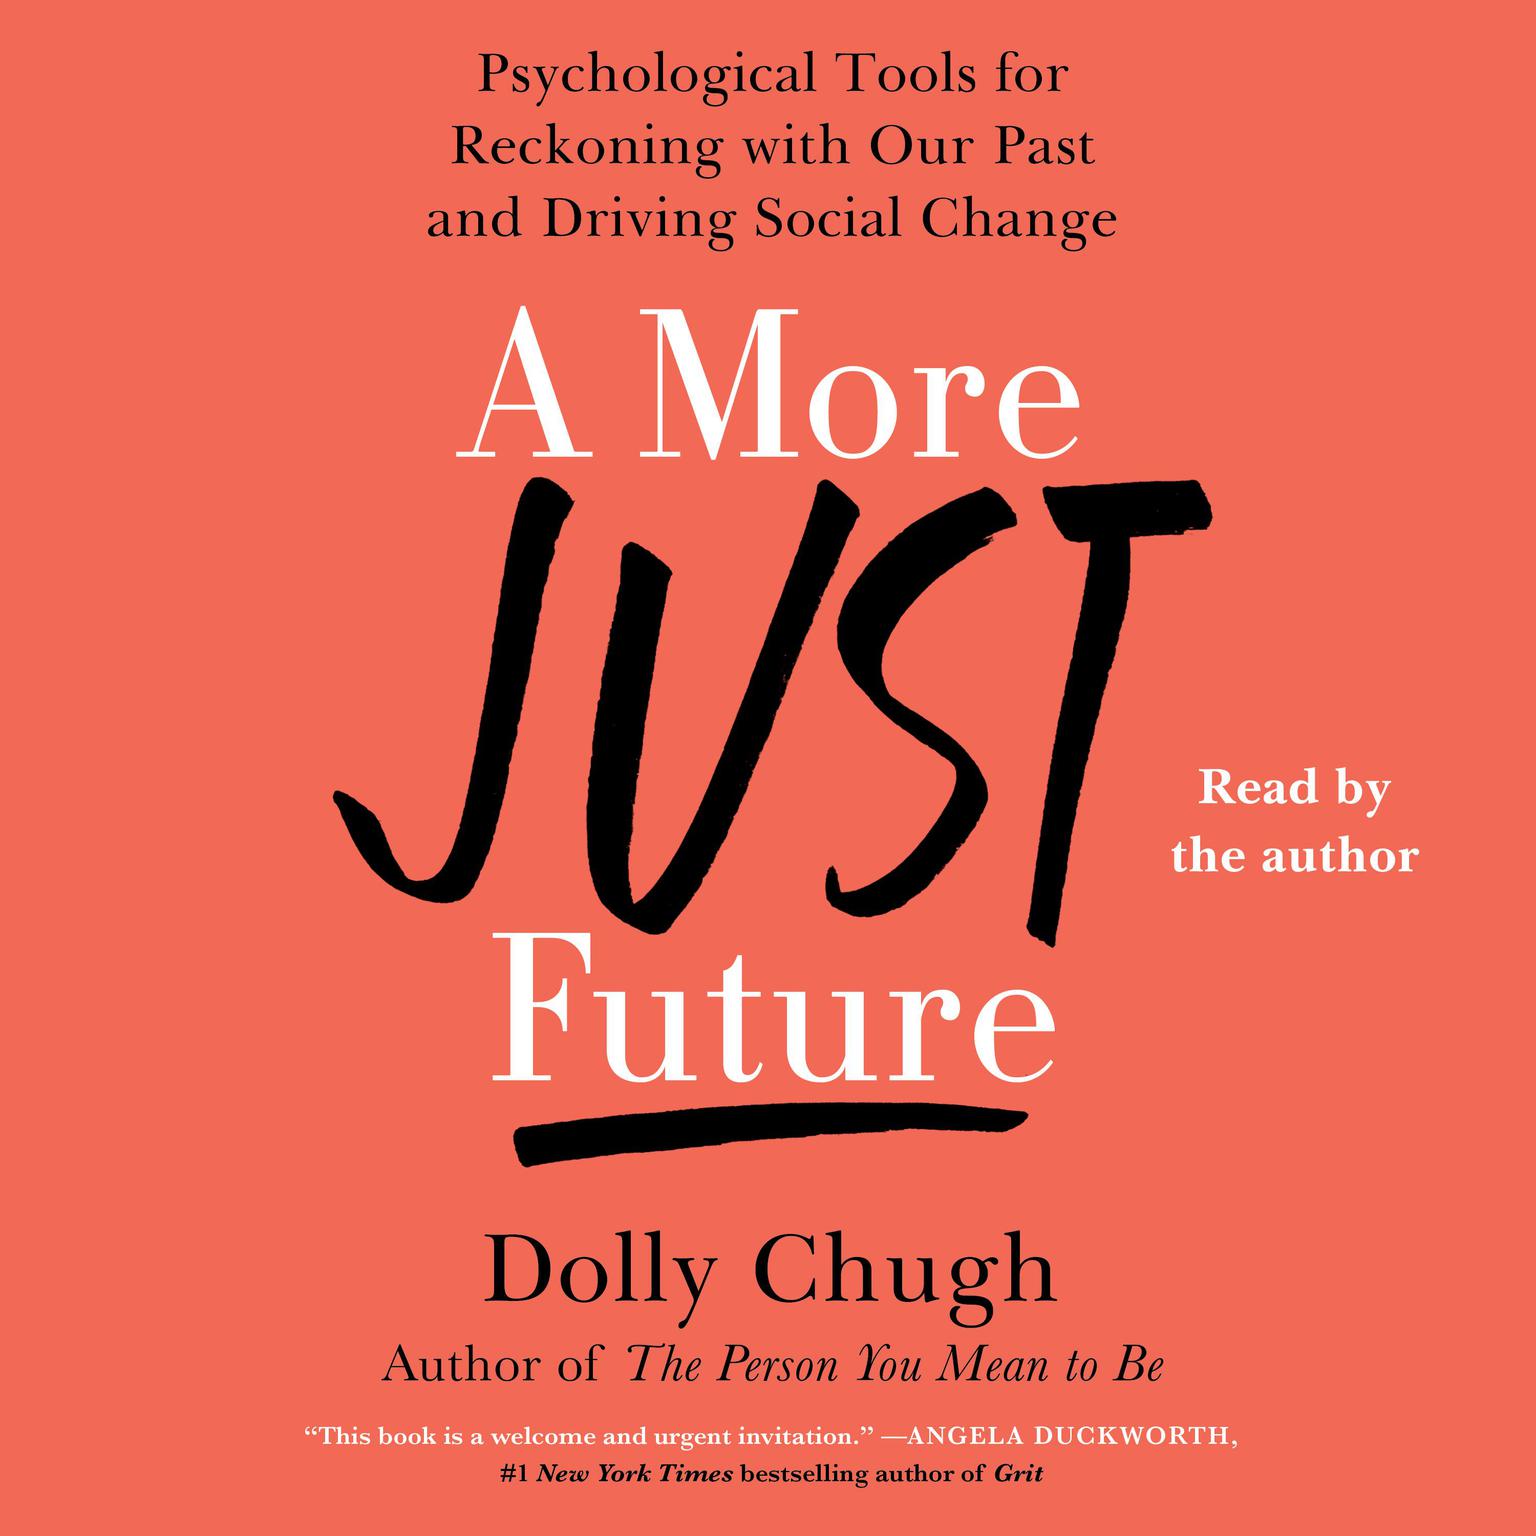 A More Just Future: Psychological Tools for Reckoning with Our Past and Driving Social Change Audiobook, by Dolly Chugh